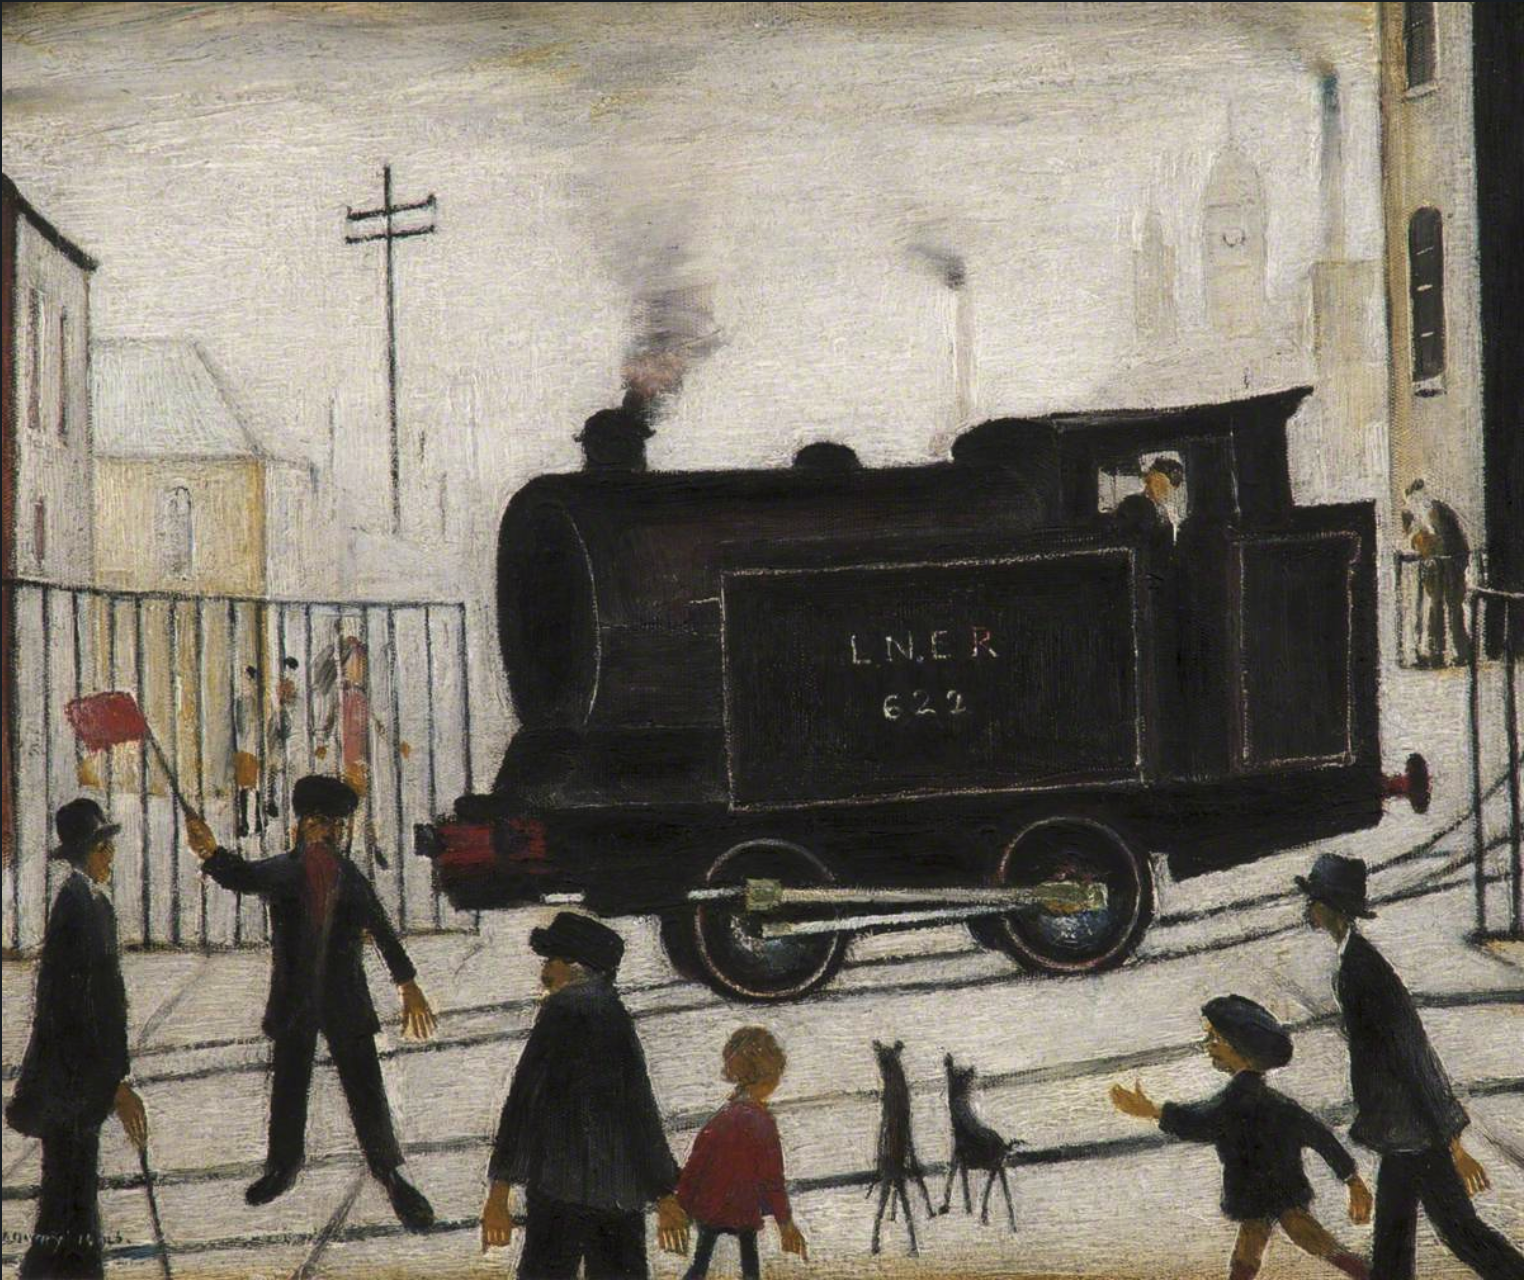 Level crossing (1946) by Laurence Stephen Lowry (1887 - 1976), English artist.